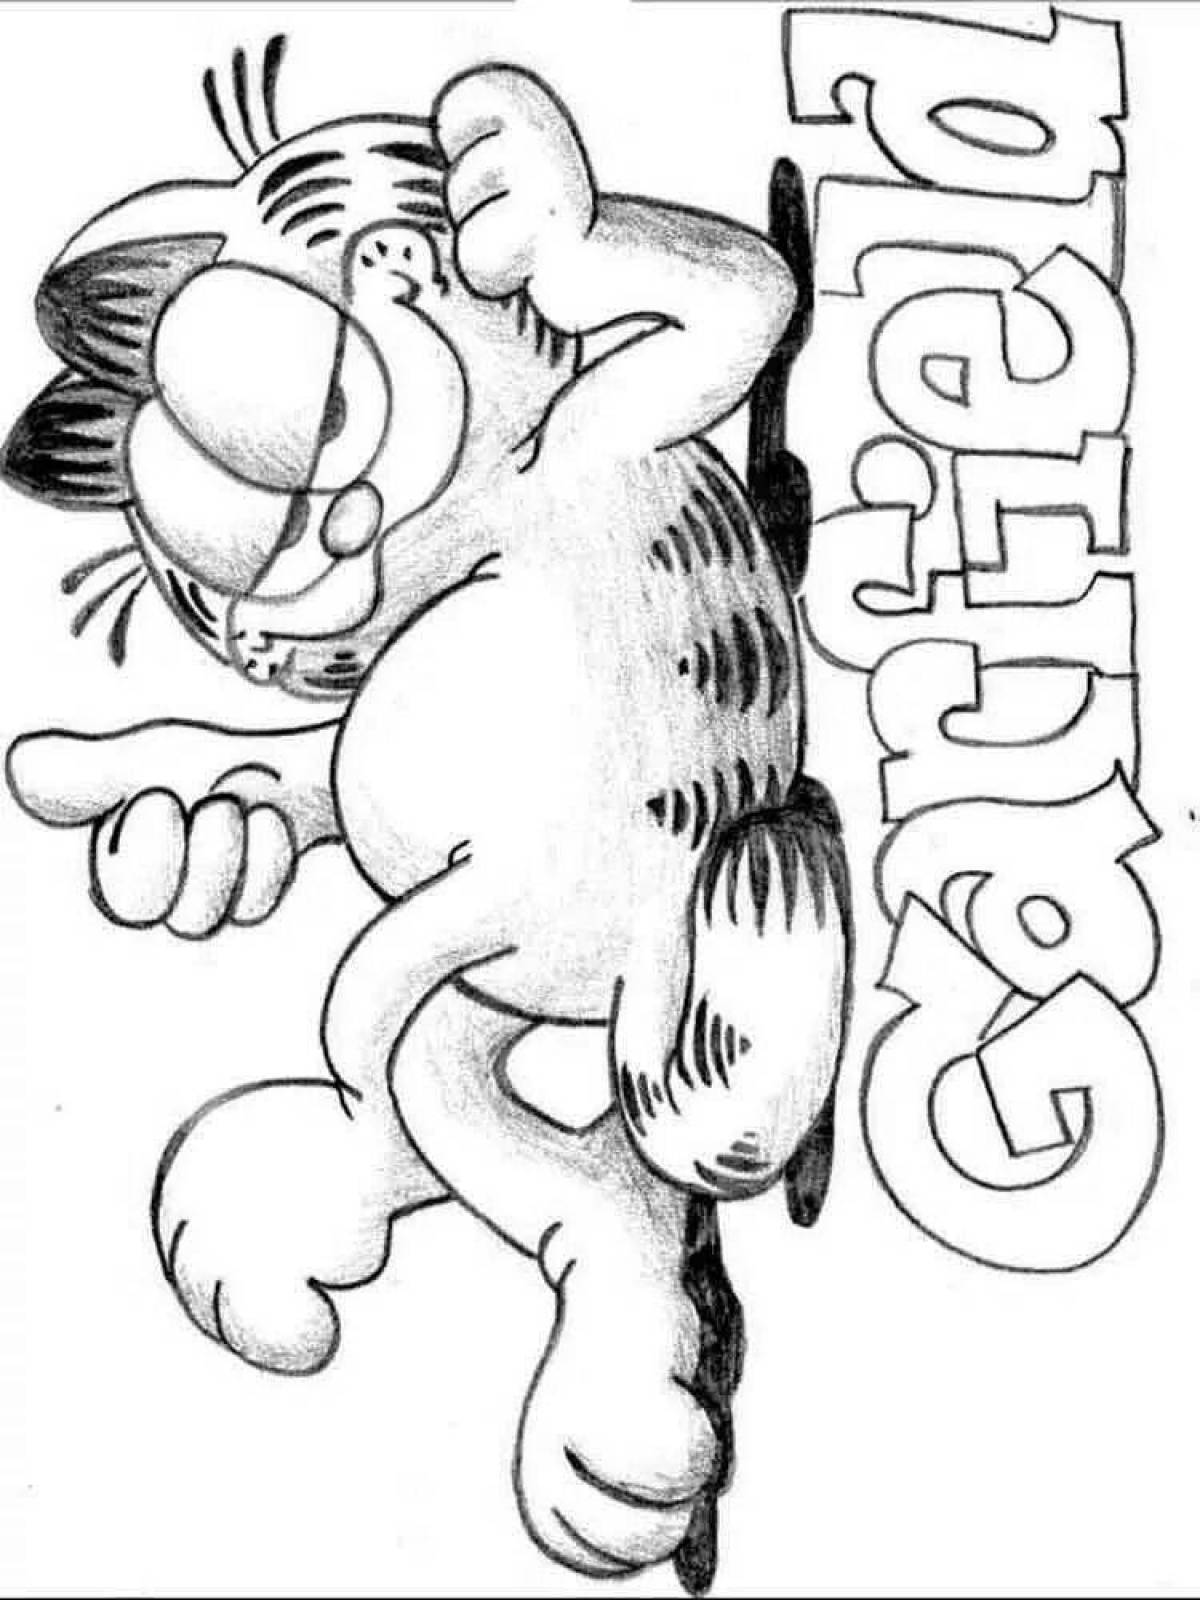 Colorful garfield cat coloring page